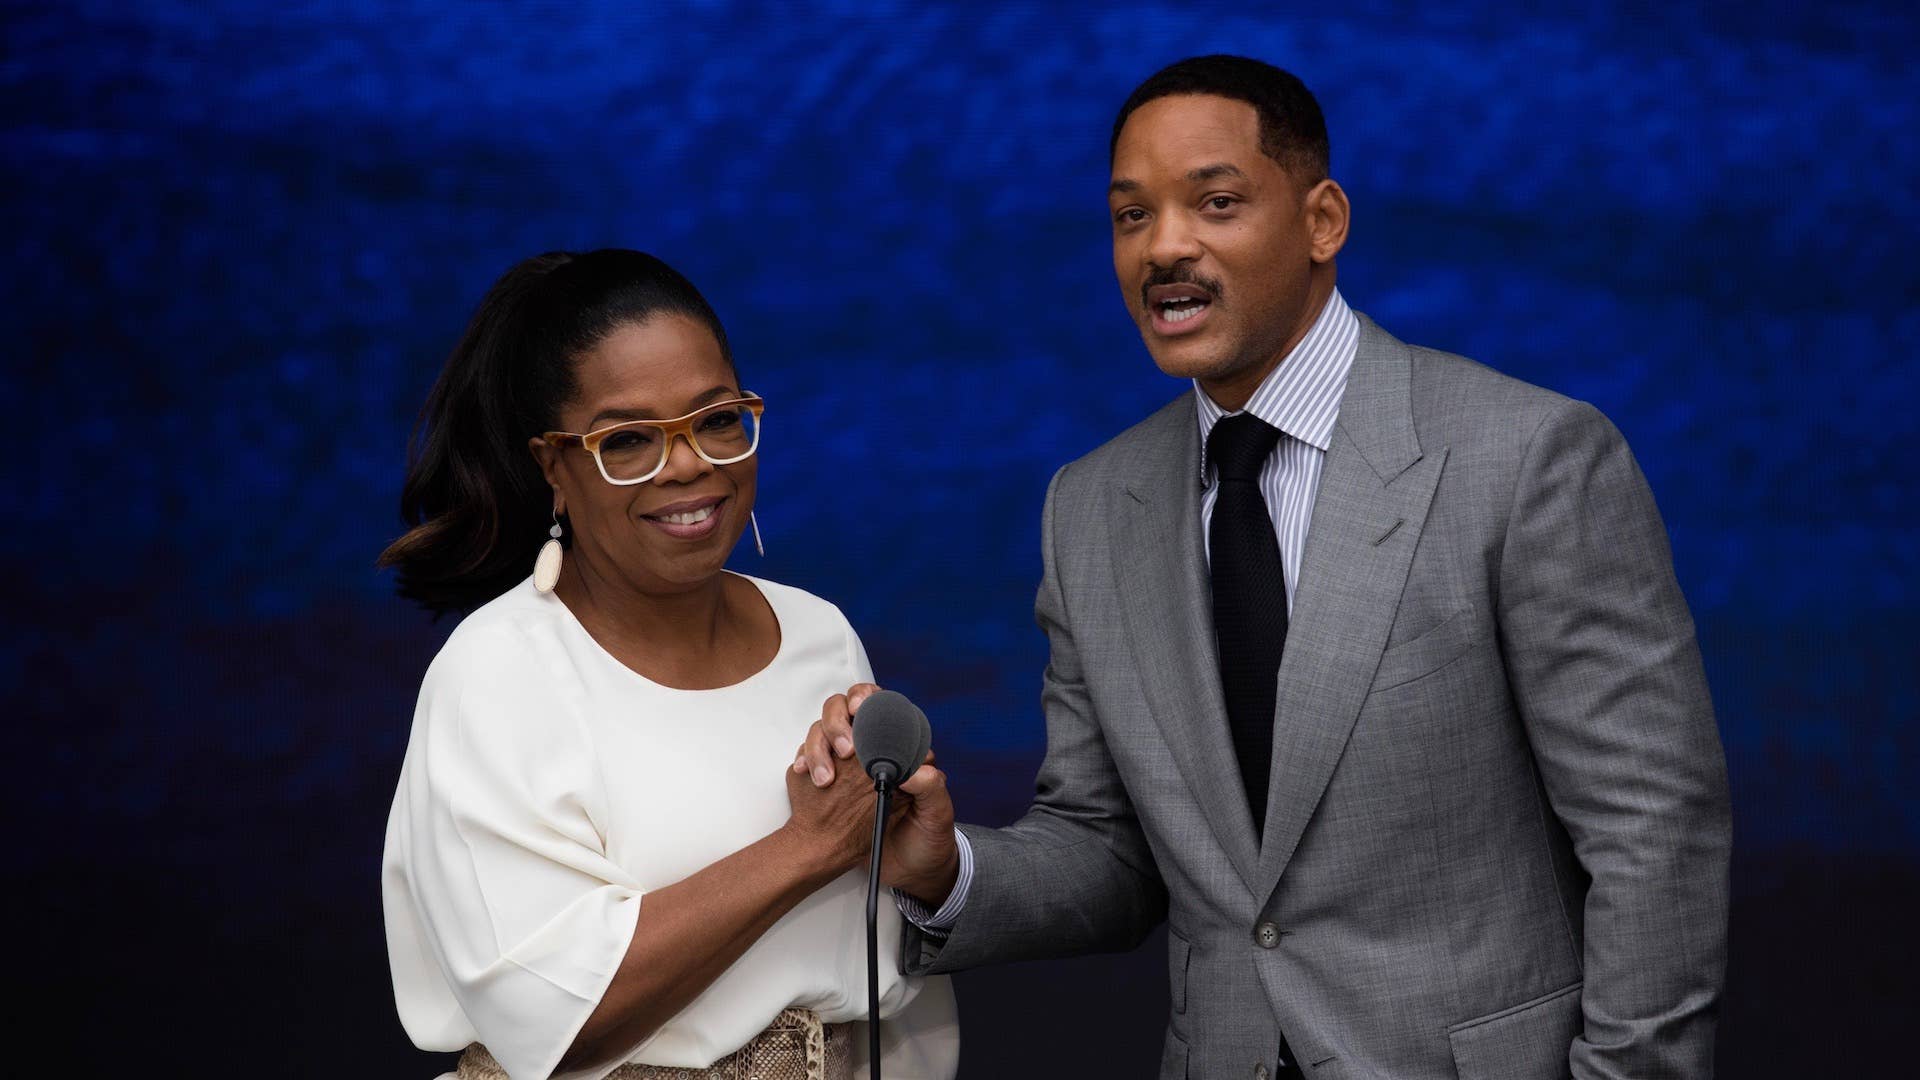 Entertainers Oprah Winfrey and Will Smith speak at the opening of the National Museum of African American History and Culture